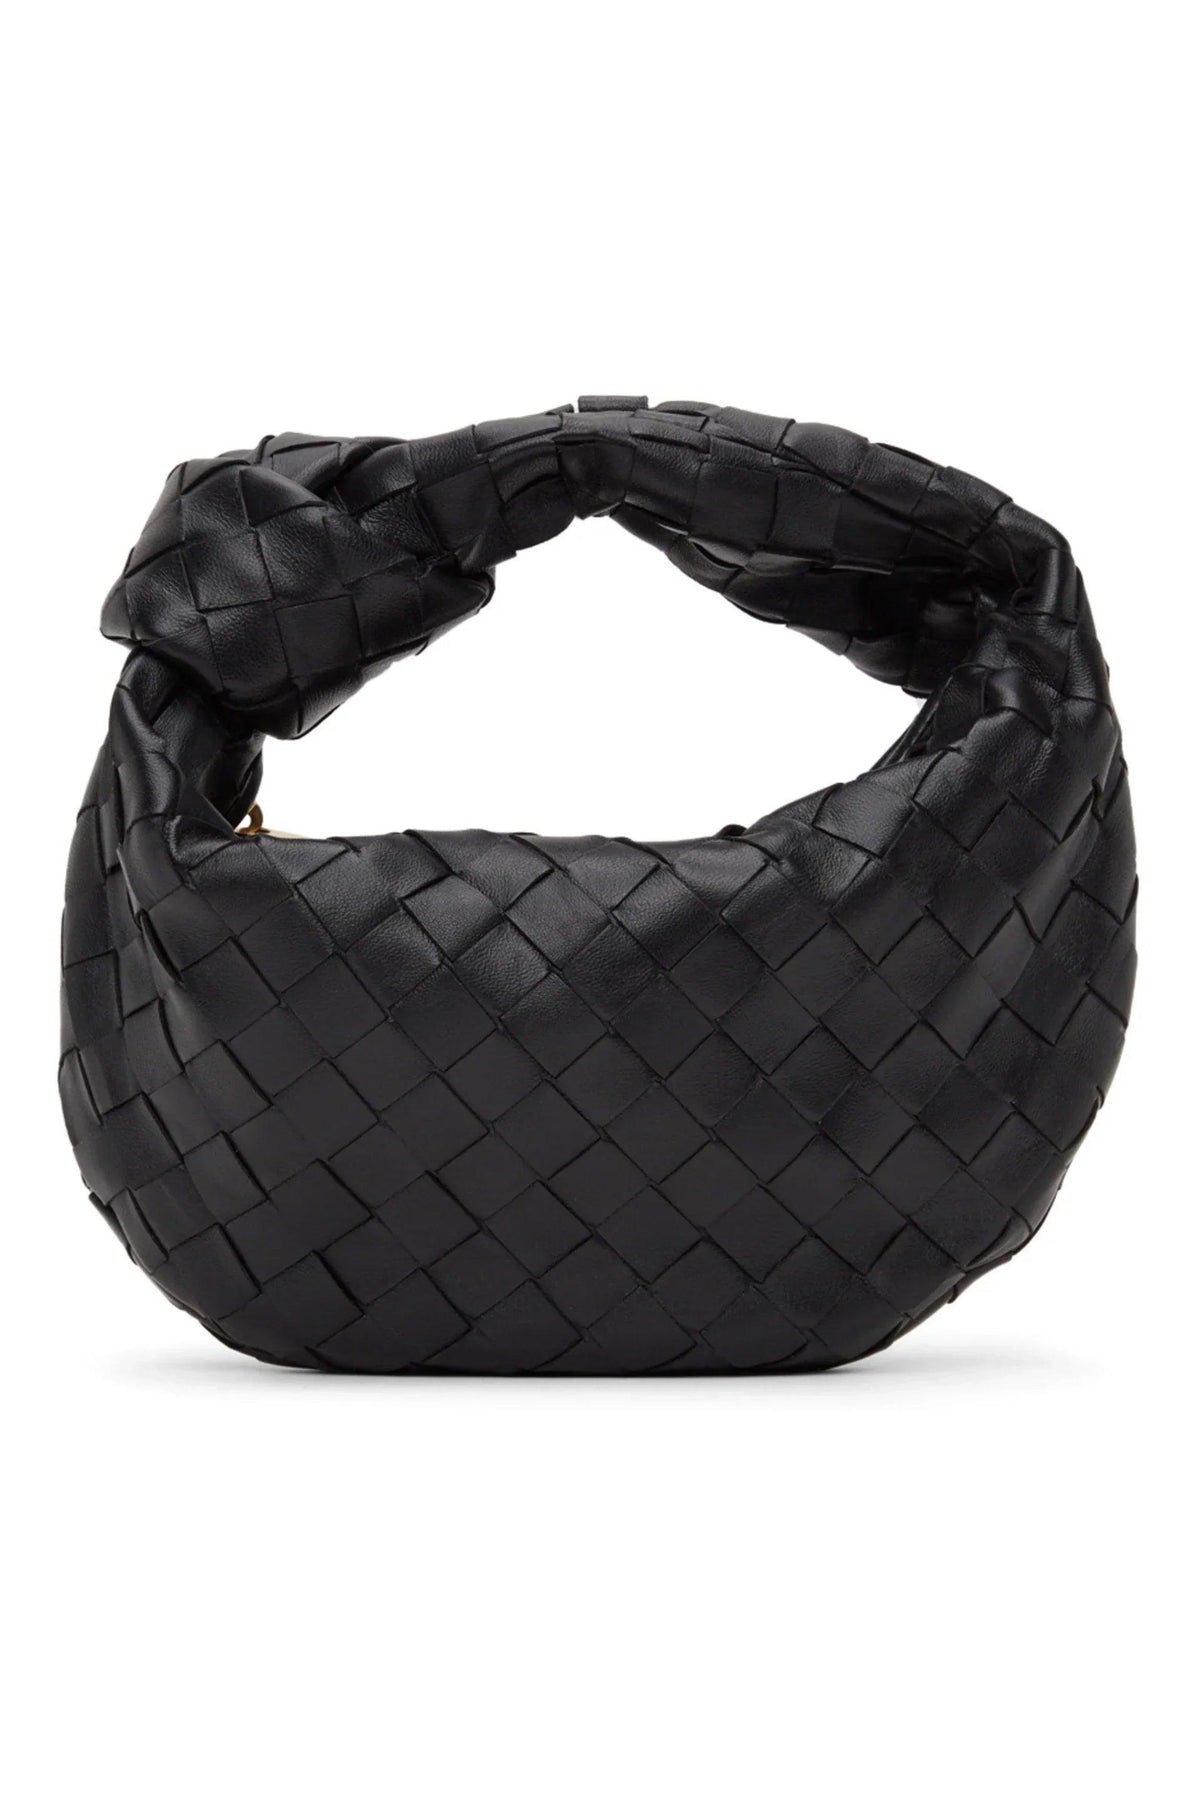 OutDazl - Leather Small Woven Knotted Clutch Joy in Black - OutDazl